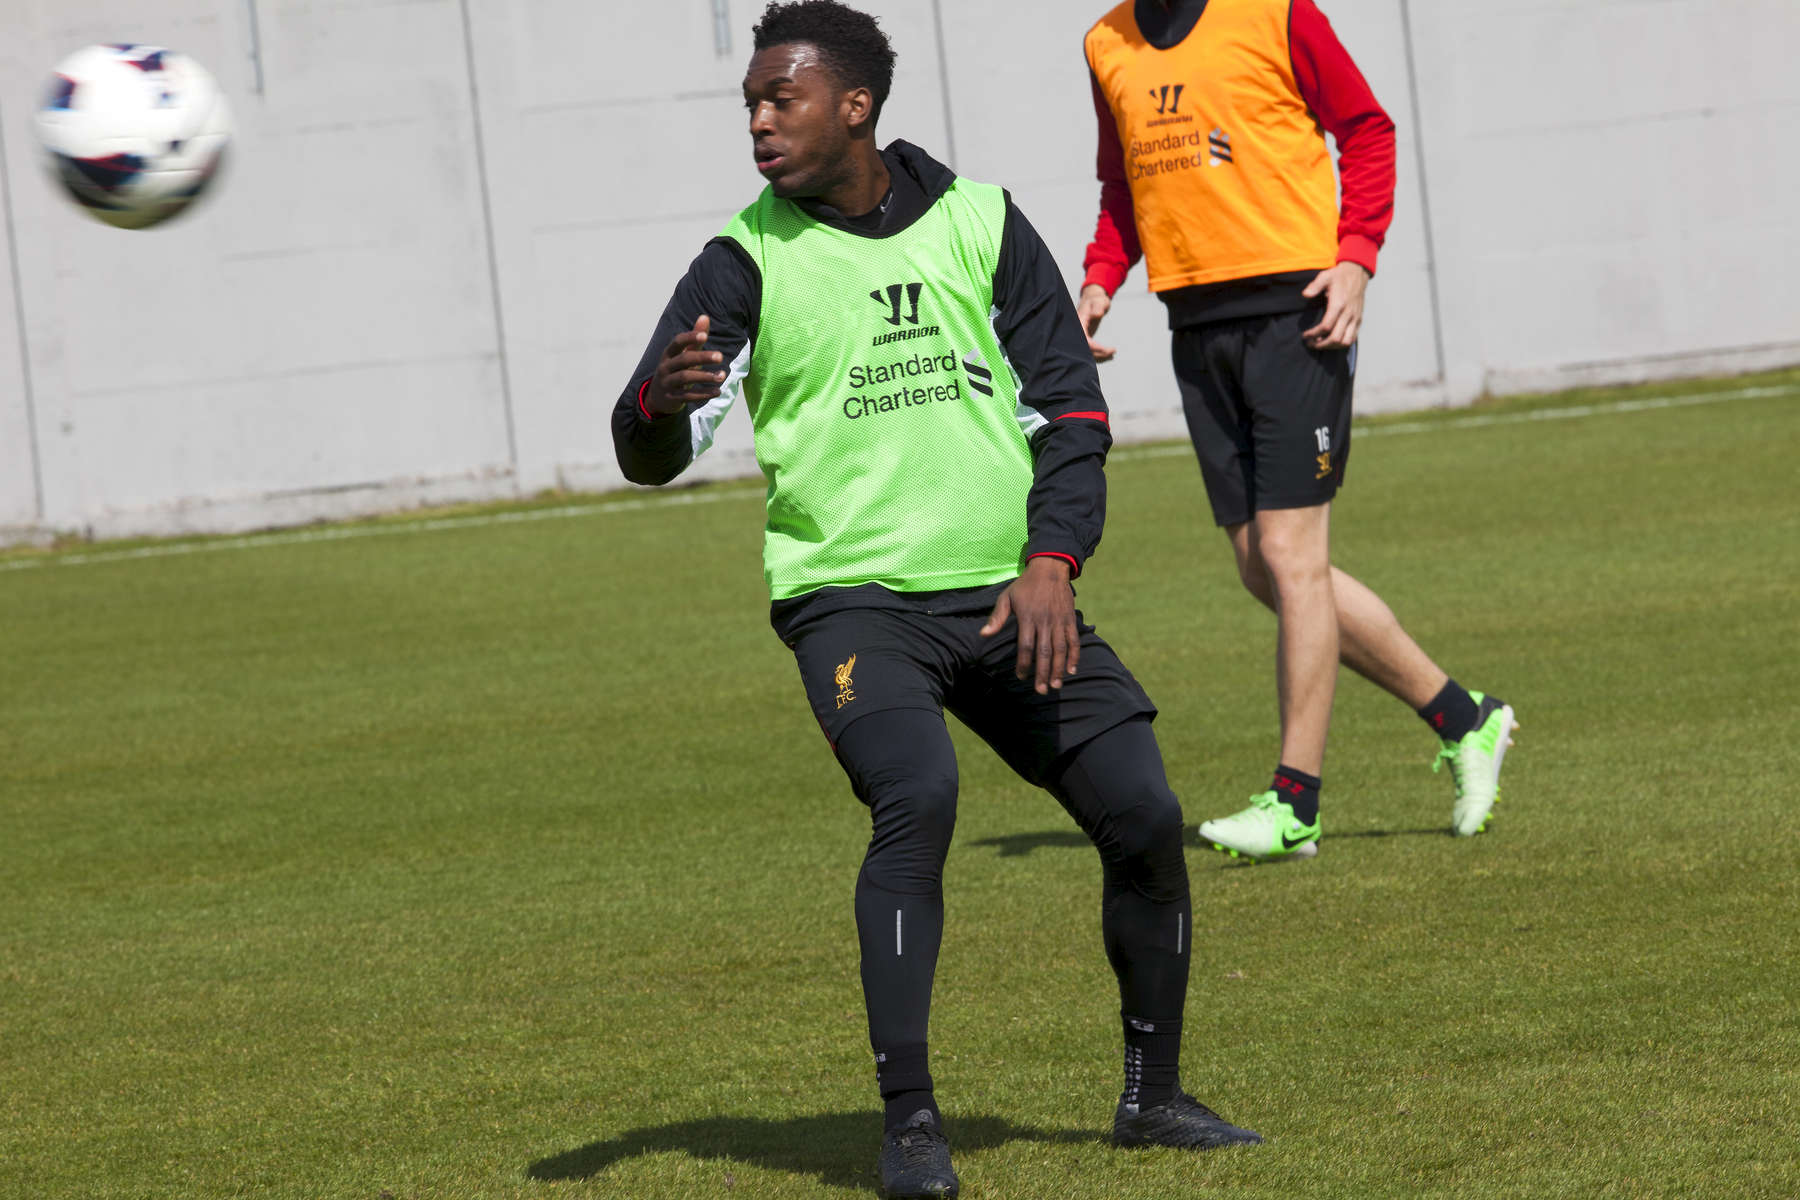 Liverpool FC forward Daniel Sturridge during training at Melwood.Melwood is the Liverpool FC training ground, located in the West Derby area of Liverpool. It is seperate from the Liverpool Academy, which is based in Kirkby.Melwood was redeveloped in the early 2000′s with large input from then-manager Gerard Houllier and now features some of the best facilities in Europe. It has been the club’s training ground since the fifties and was previously transformed into a top class facility by Bill Shankly.Facilities include sythetic pitches, rehabilitation rooms, press and meeting rooms, gymnasium, swimming pool, restaurant and recreational facilities.